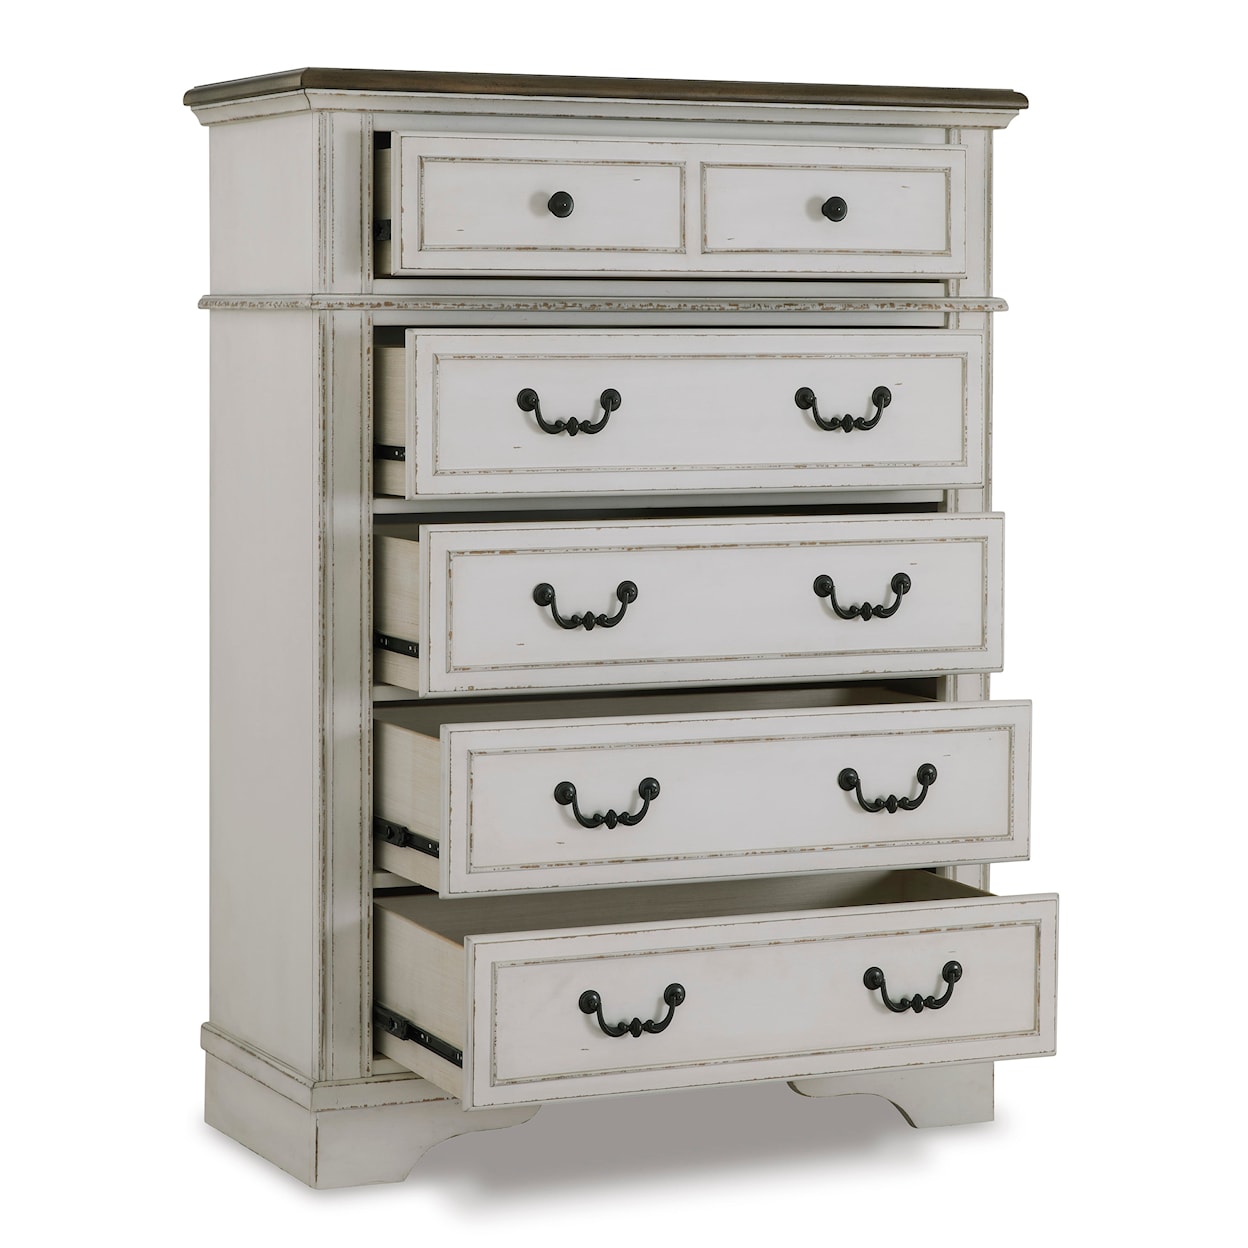 Benchcraft Brollyn Chest of Drawers